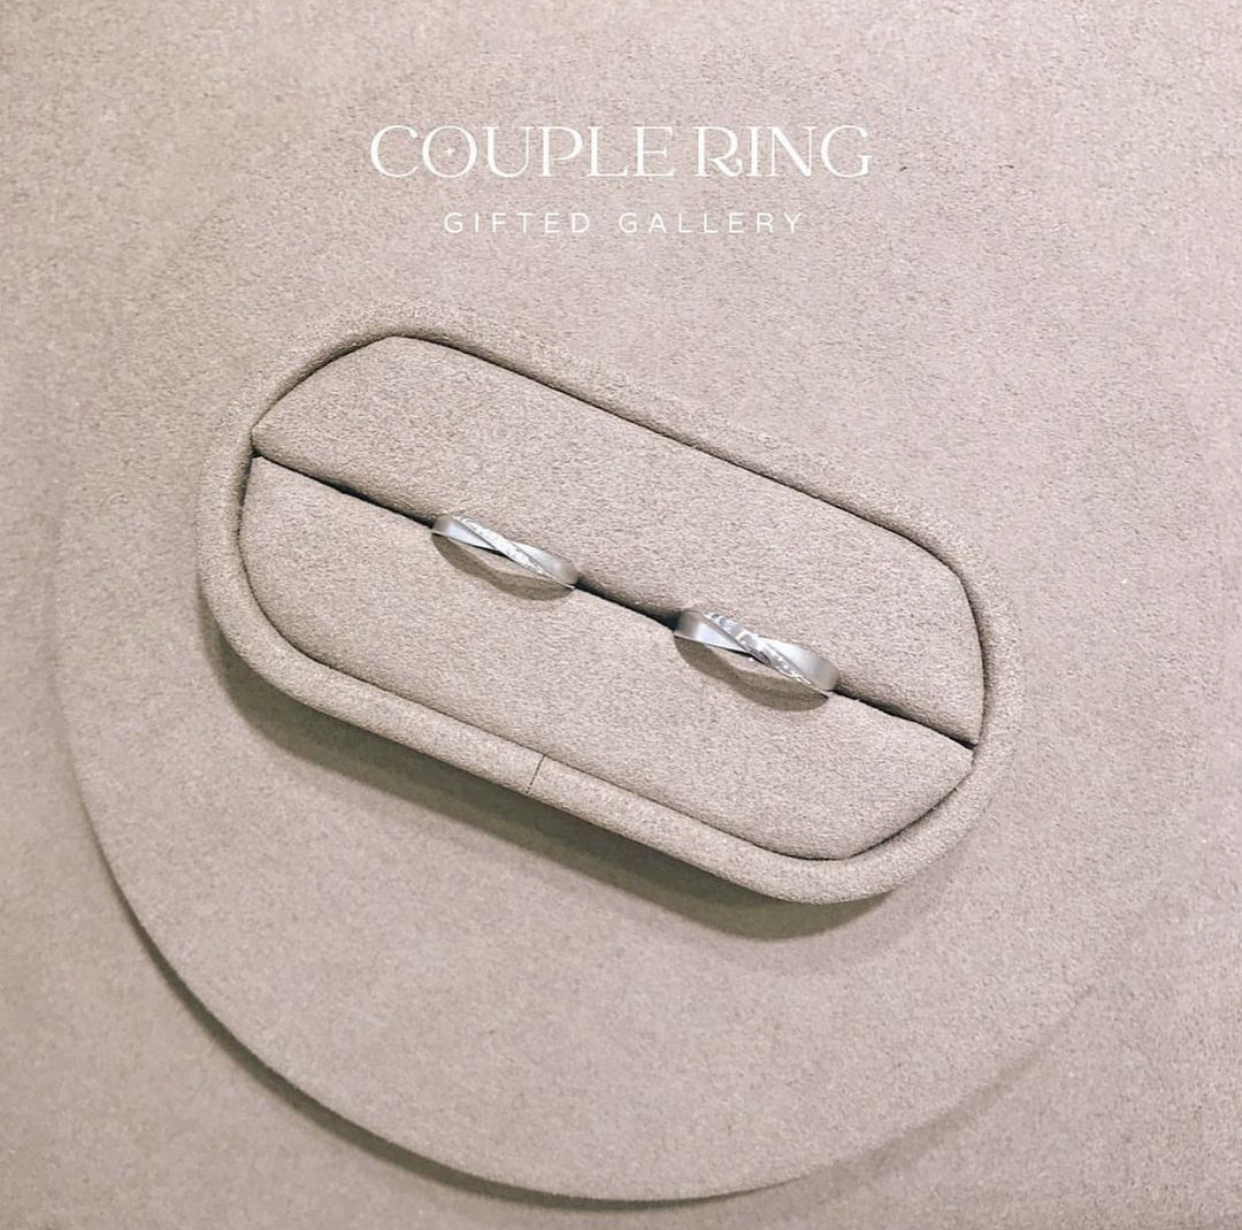 FIANCÉE-Always Couple Ring